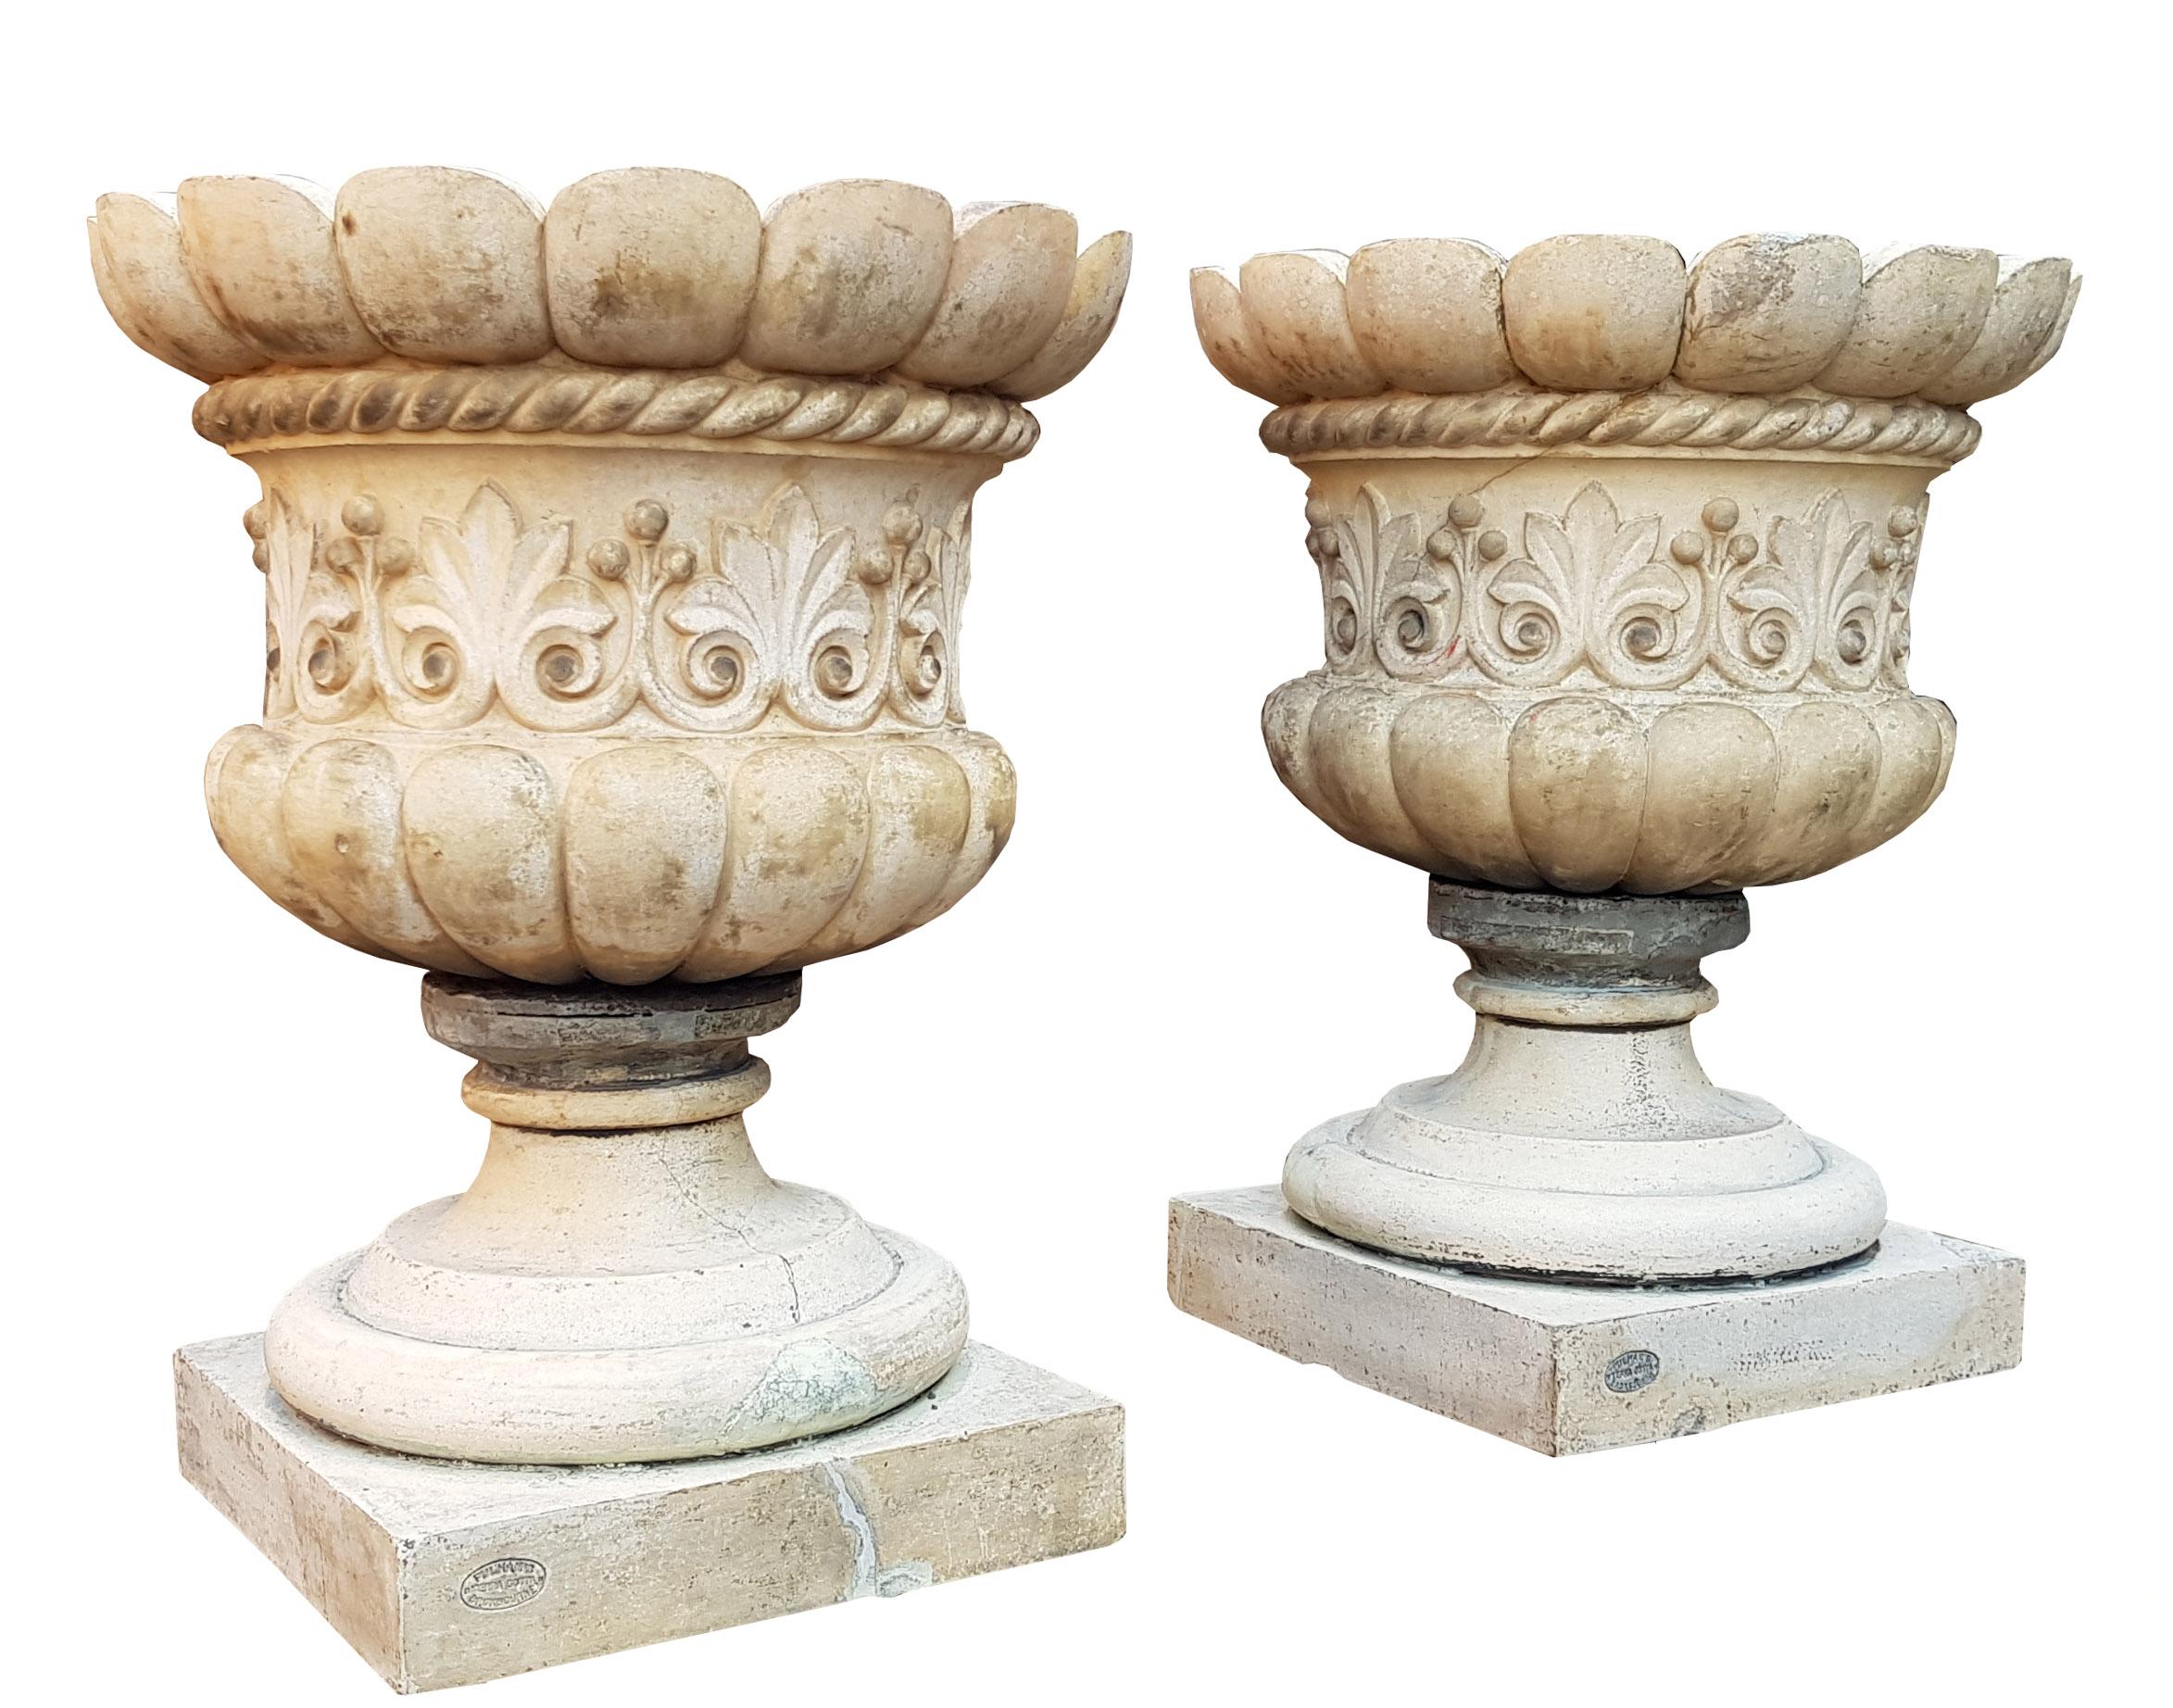 A pair of Fine Pulham garden urns reclaimed from a property in Scotland. Made from Terracotta in Broxbourne, England around 1870. An identical urn is featured in “Antiques form the Garden” Alistair Morris, P. 128. Both bearing clear stamps to the